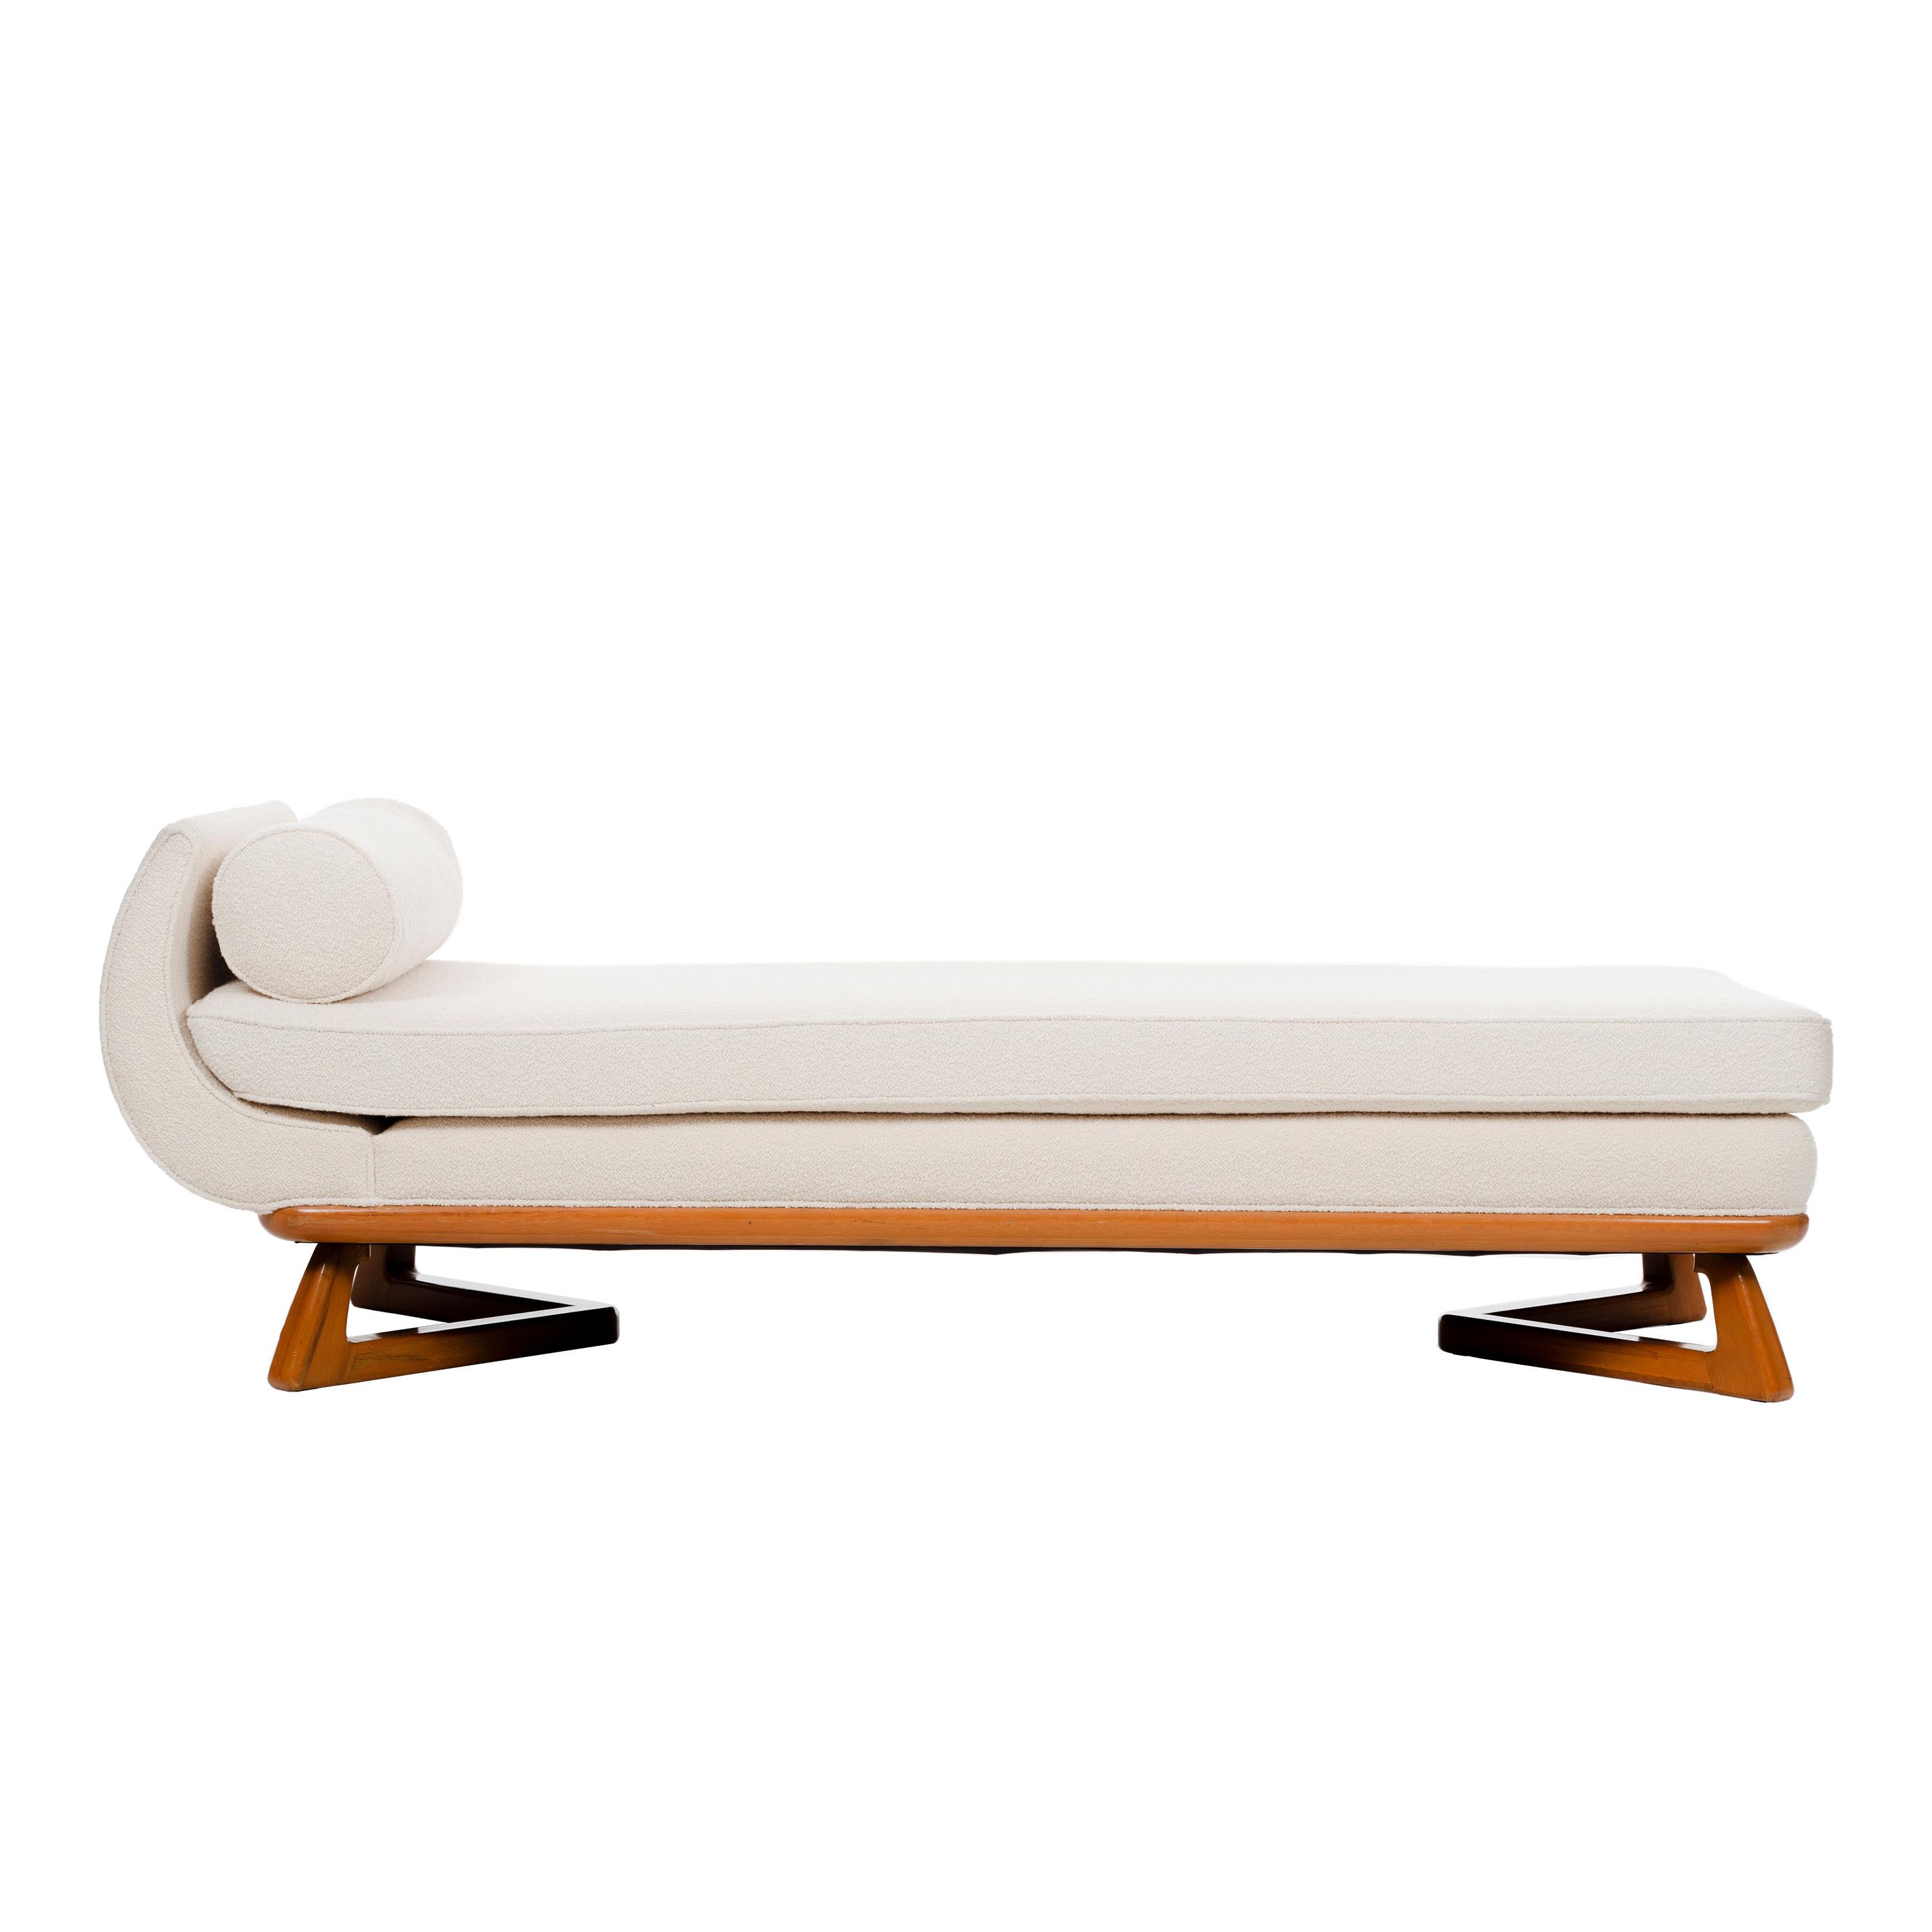 Laszlo for Brown Saltman chaise longue, solid bleached walnut trapezoid bases bridge upholstered deck and lose cushion and curved scroll end with bolster.
Reupholstered with Great Plains from Holly Hunt bouclé.
Measures: Cushion height 18.5.